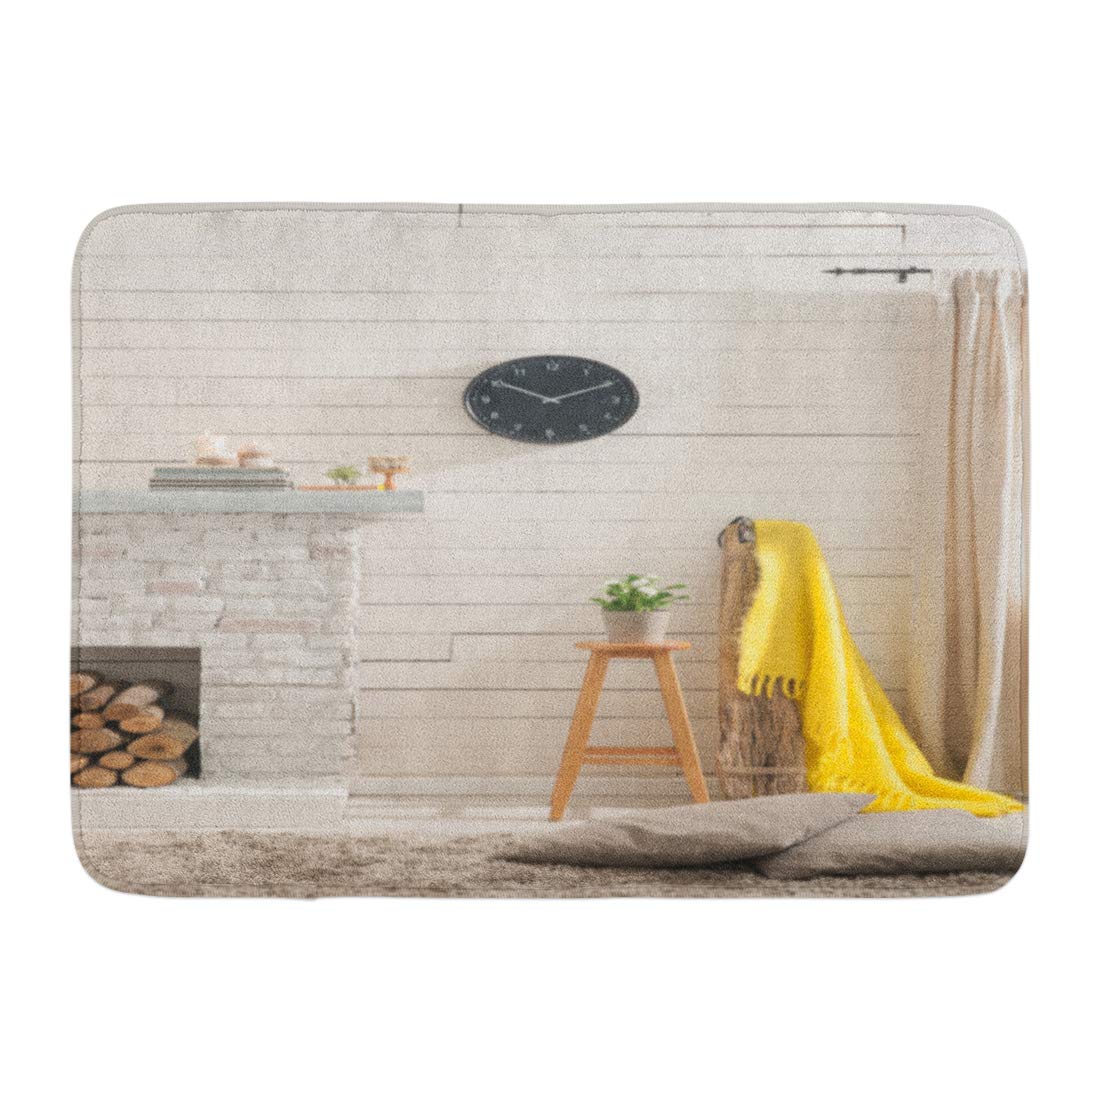 GODPOK Black Bookcase White Clock Wooden Wall with Fireplace Style Yellow Interior Blue Contemporary Rug Doormat Bath Mat 23.6x15.7 inch - image 1 of 1